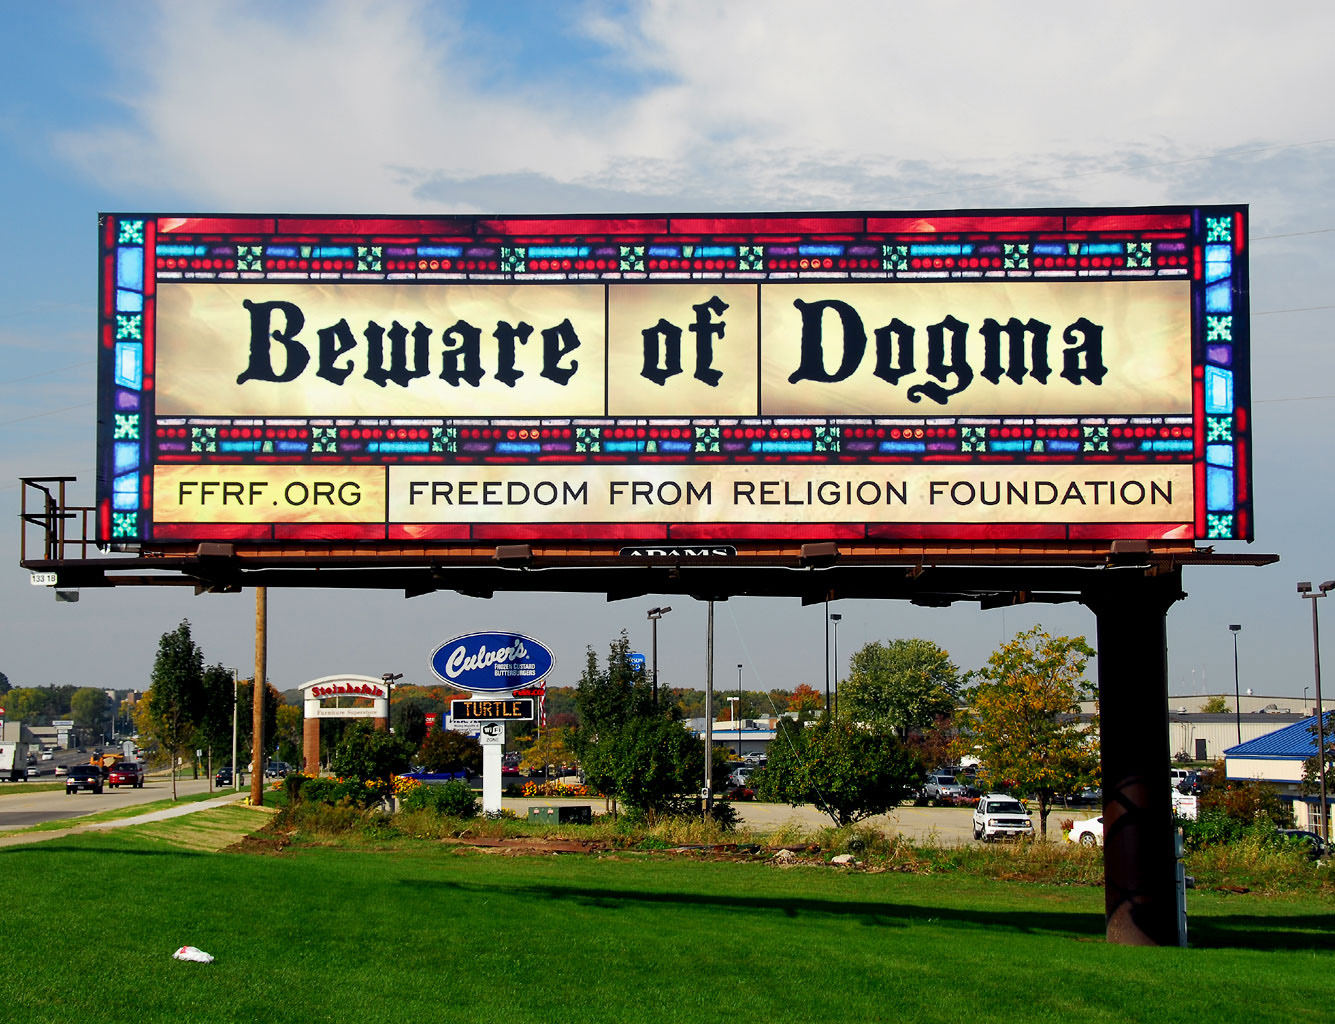 Beware of Dogma on a sign